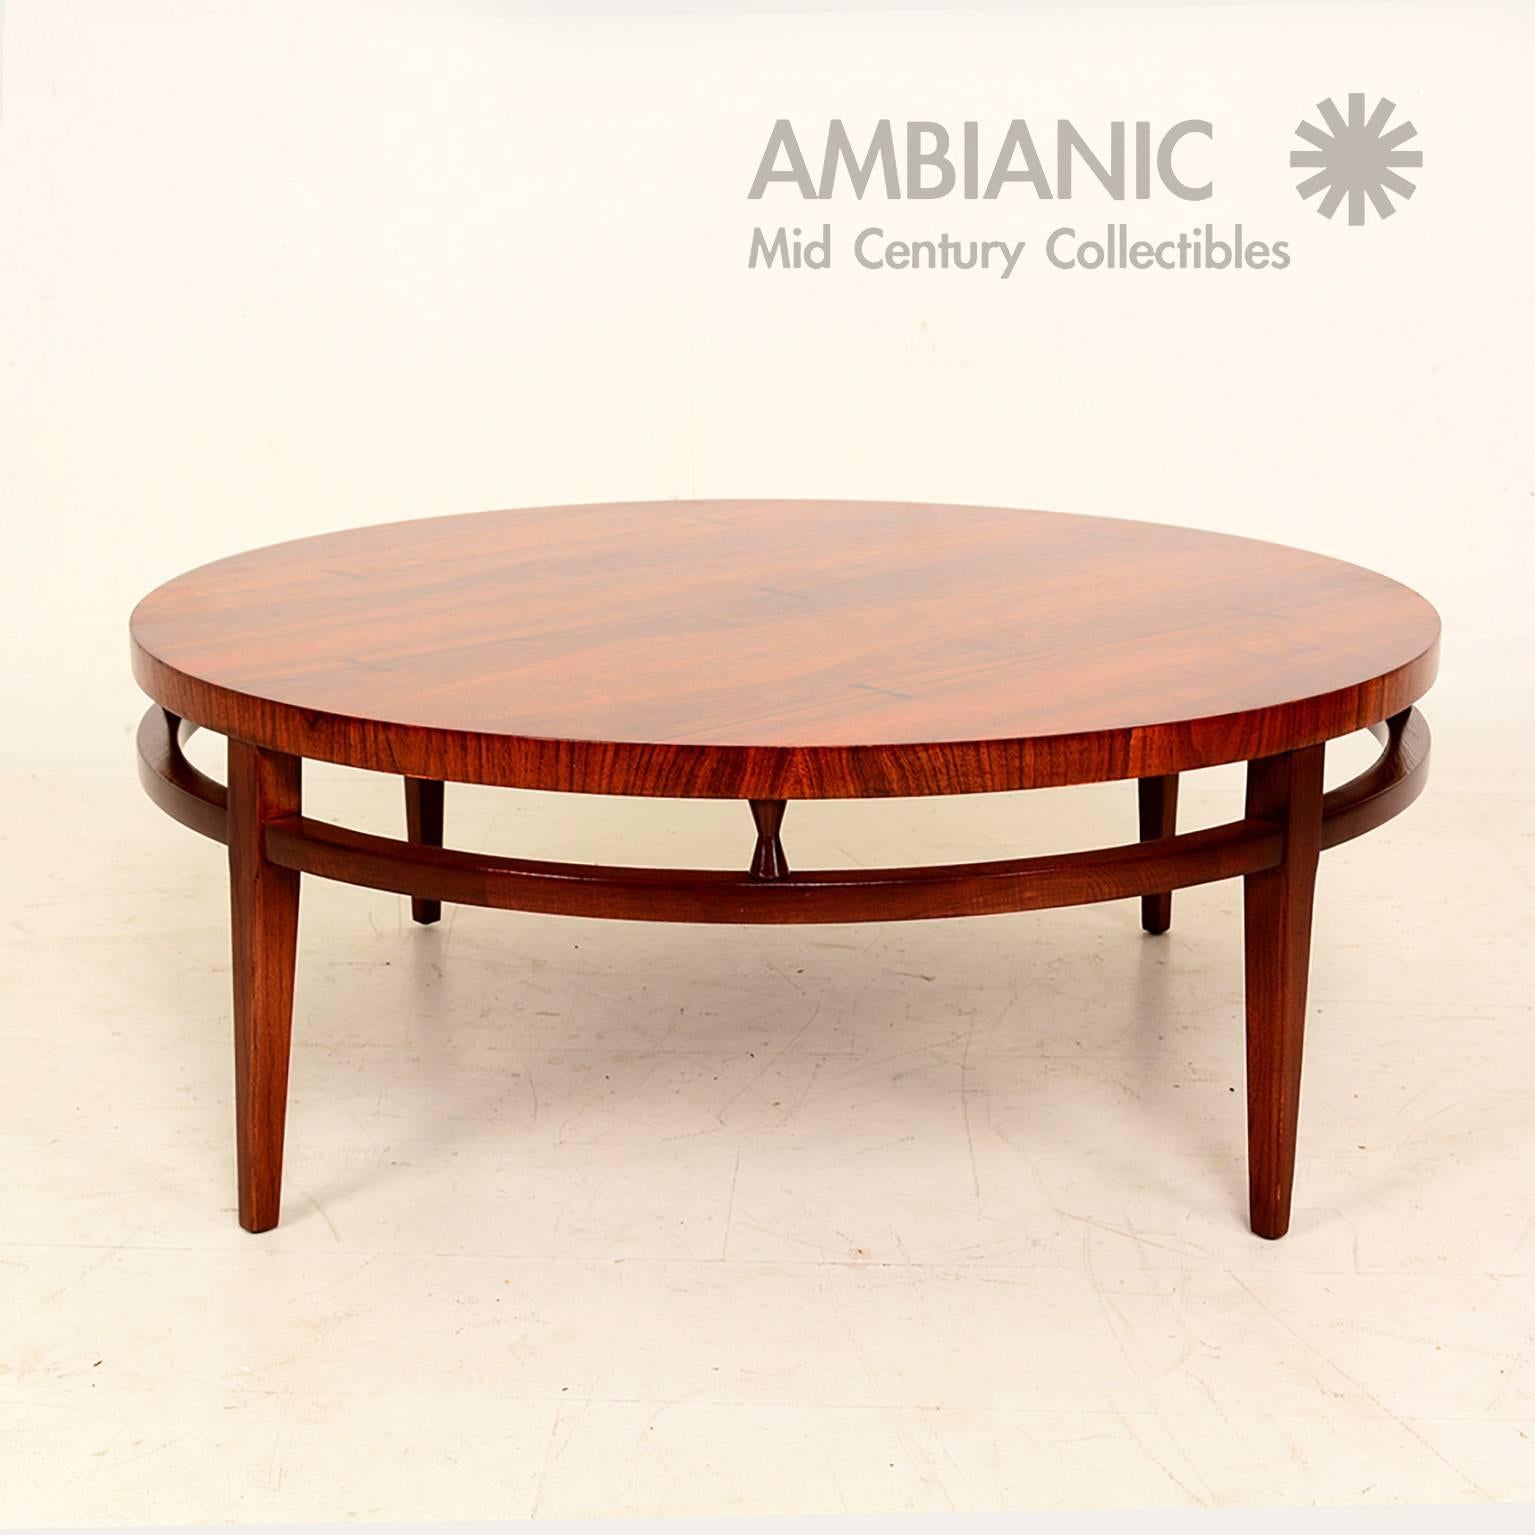 For your consideration a set of three tables by Lane after Paul McCobb walnut wood with dove tail joints in solid rosewood and ebony wood. Stamped underneath with makers label. 

Round coffee table, 38